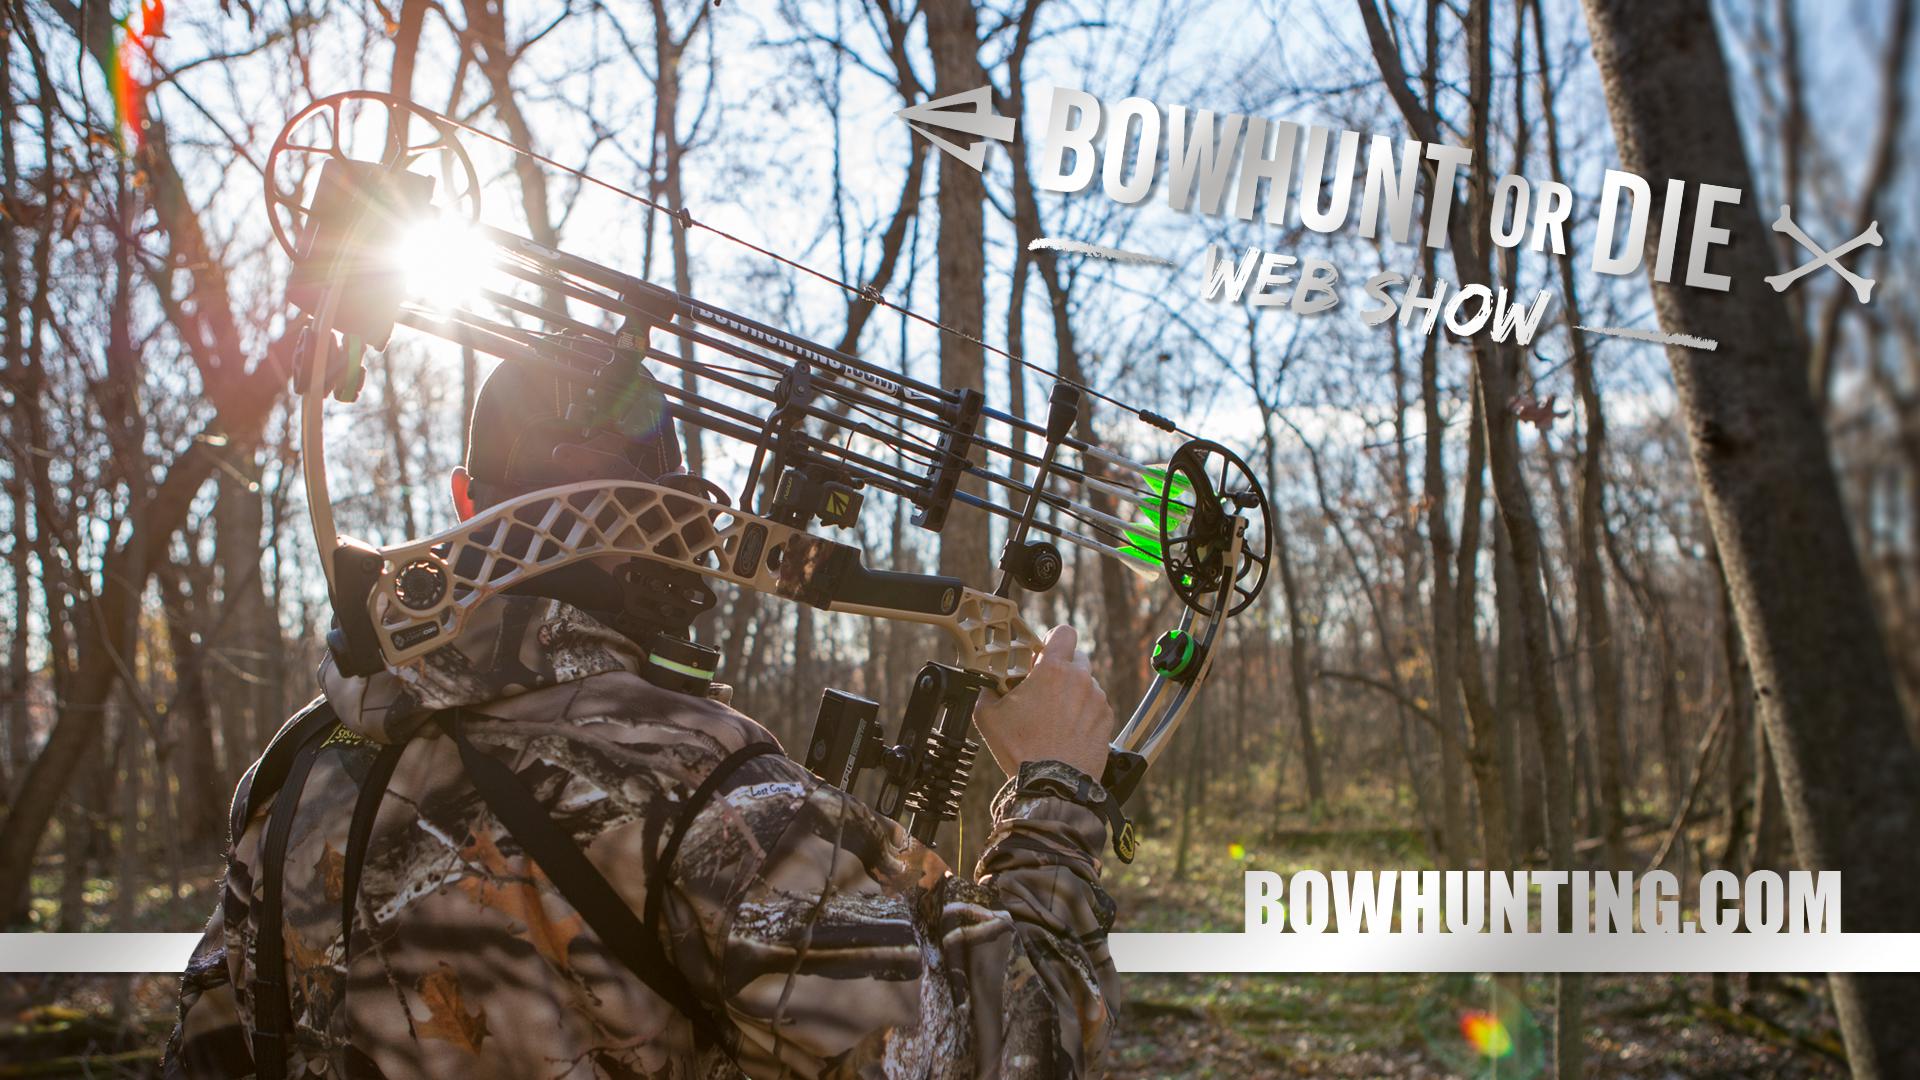 Wallpaper Archive Bowhunting